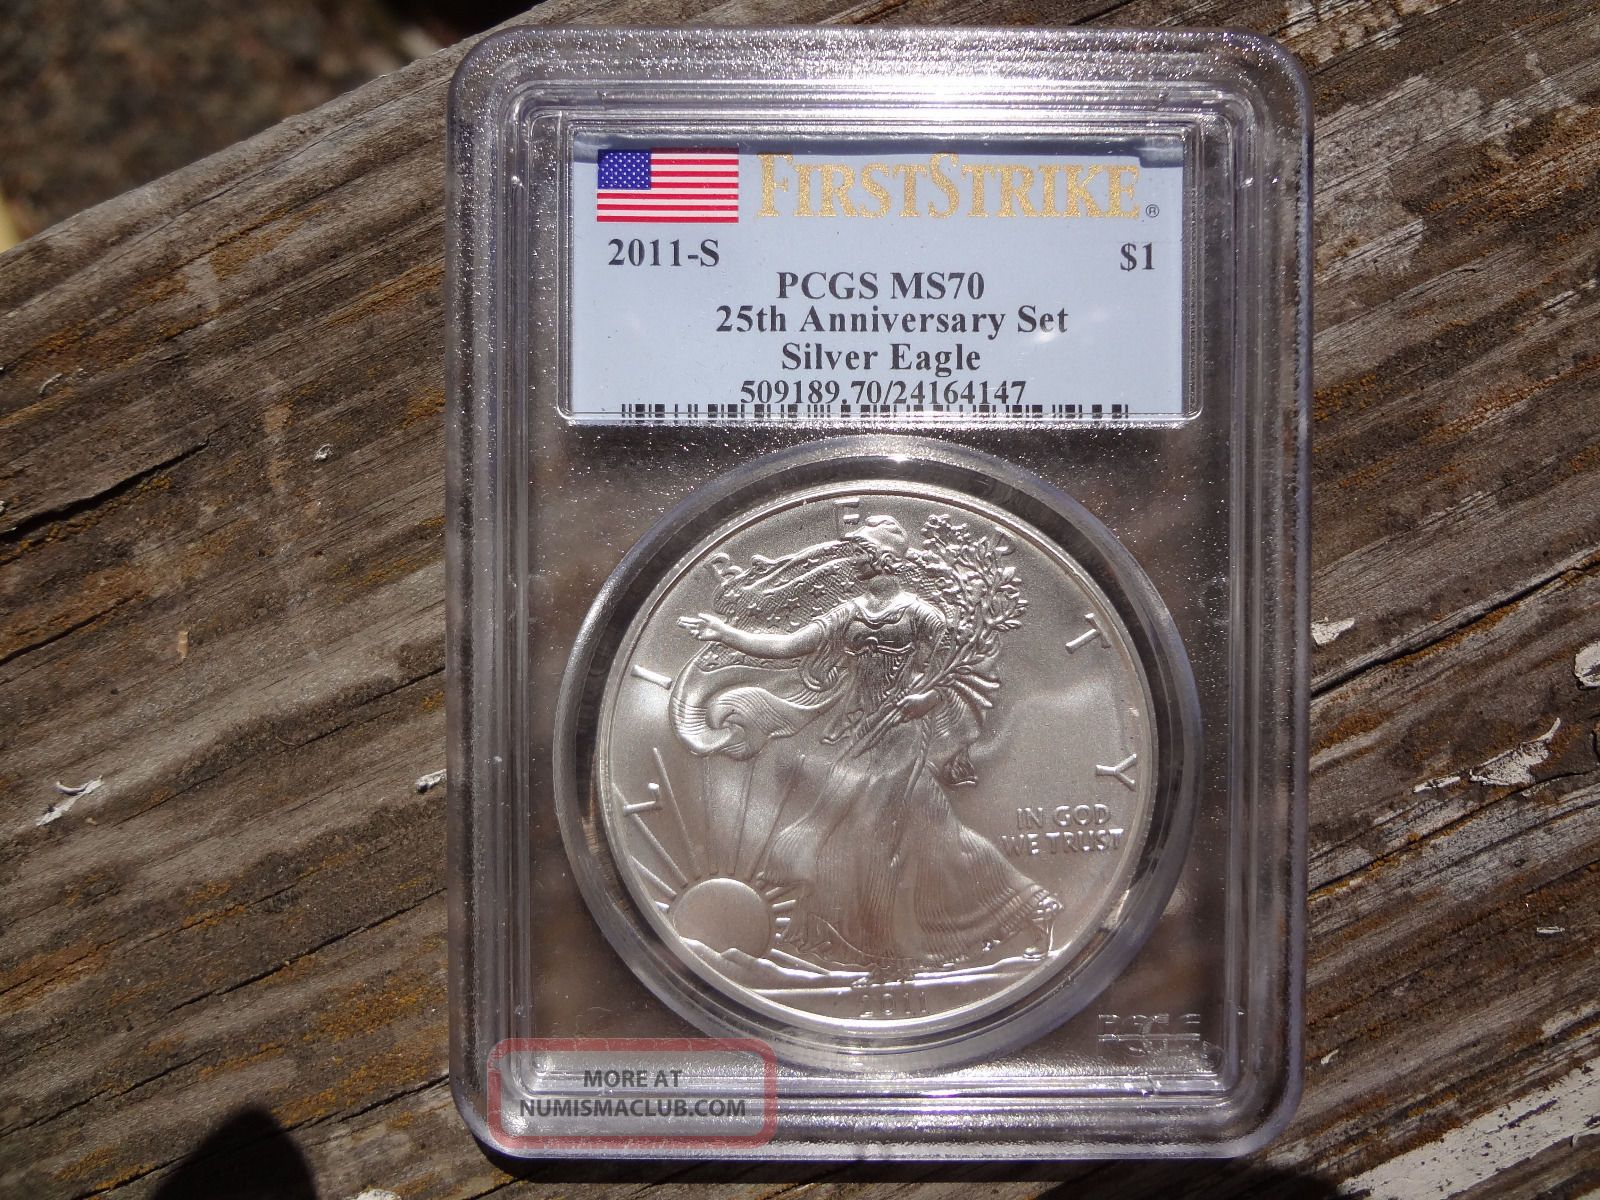 2011 S Silver Eagle 25th Anniversary Pcgs Ms70 First Strike